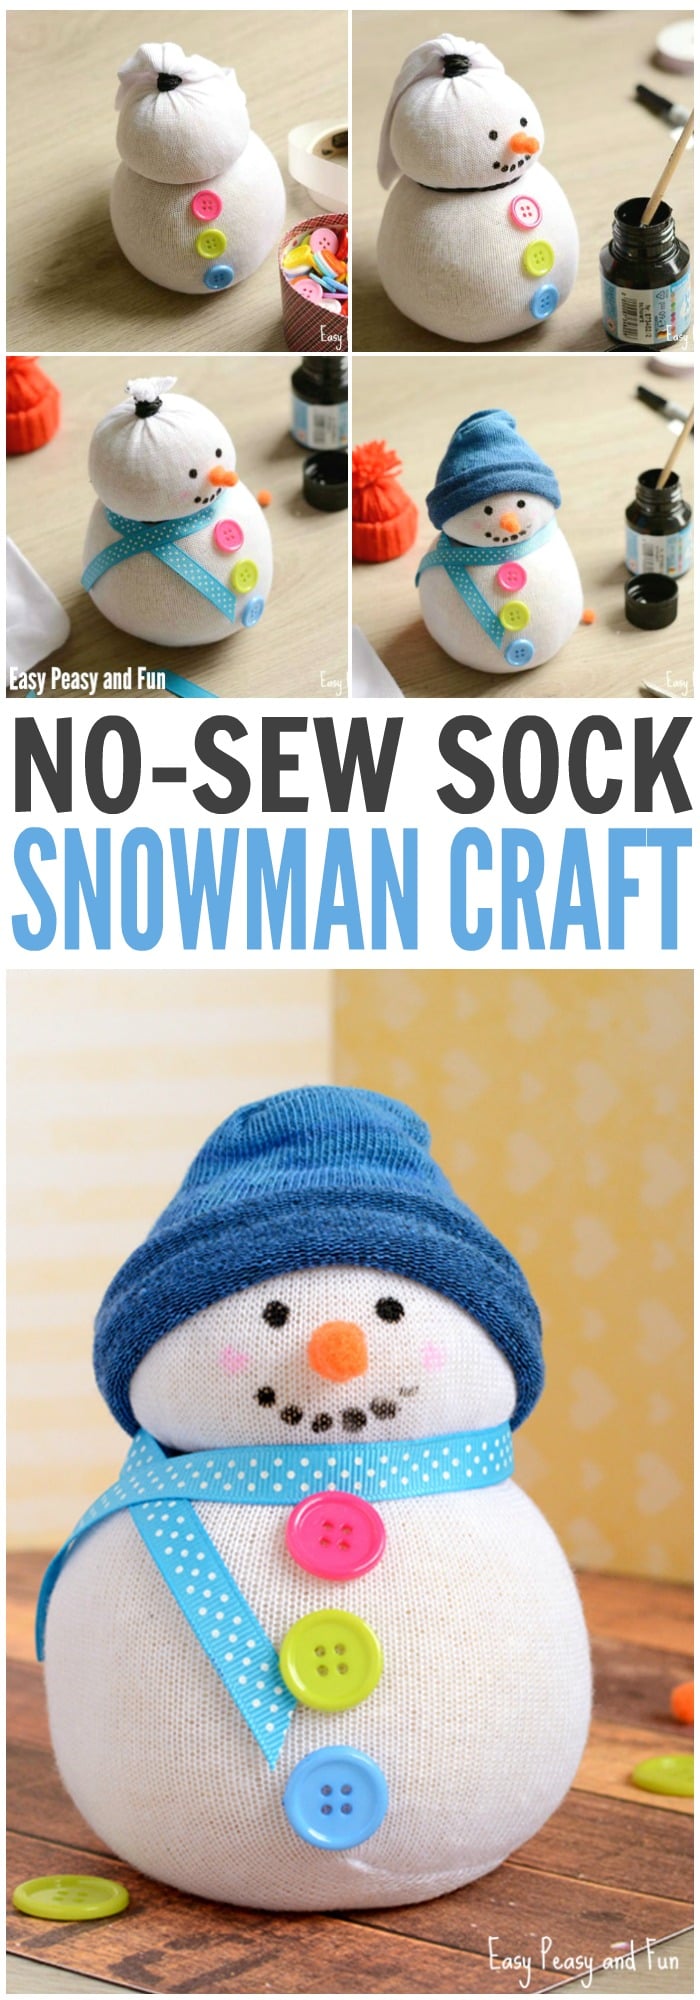 DIY No-Sew Sock Snowman Craft for Kids and Grownups. Such a fun DIY Gift Idea